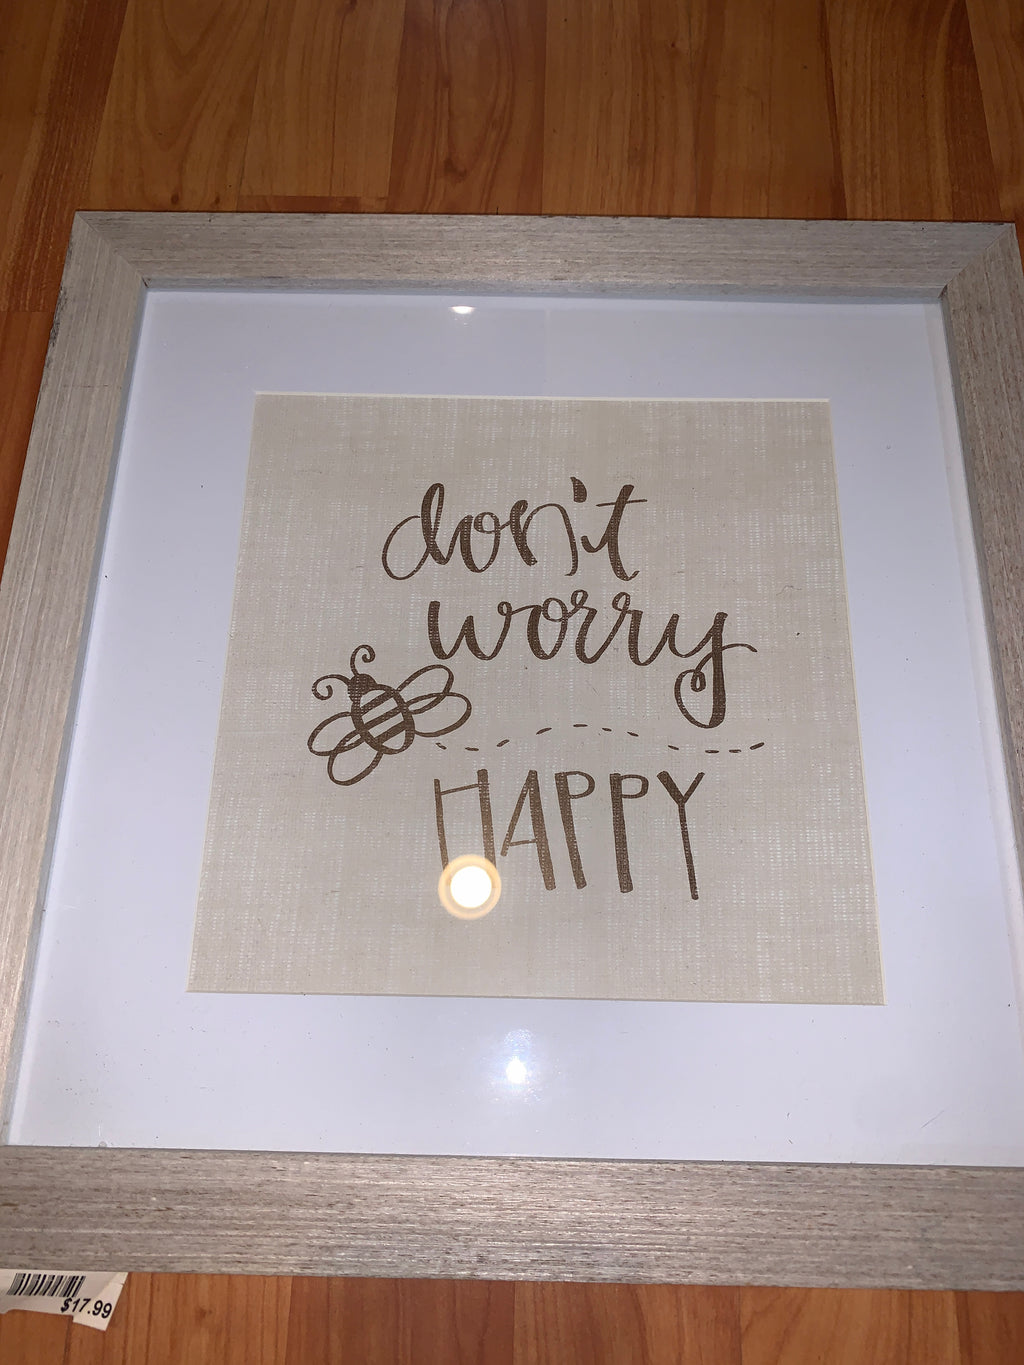 Don’t worry bee happy framed artwork